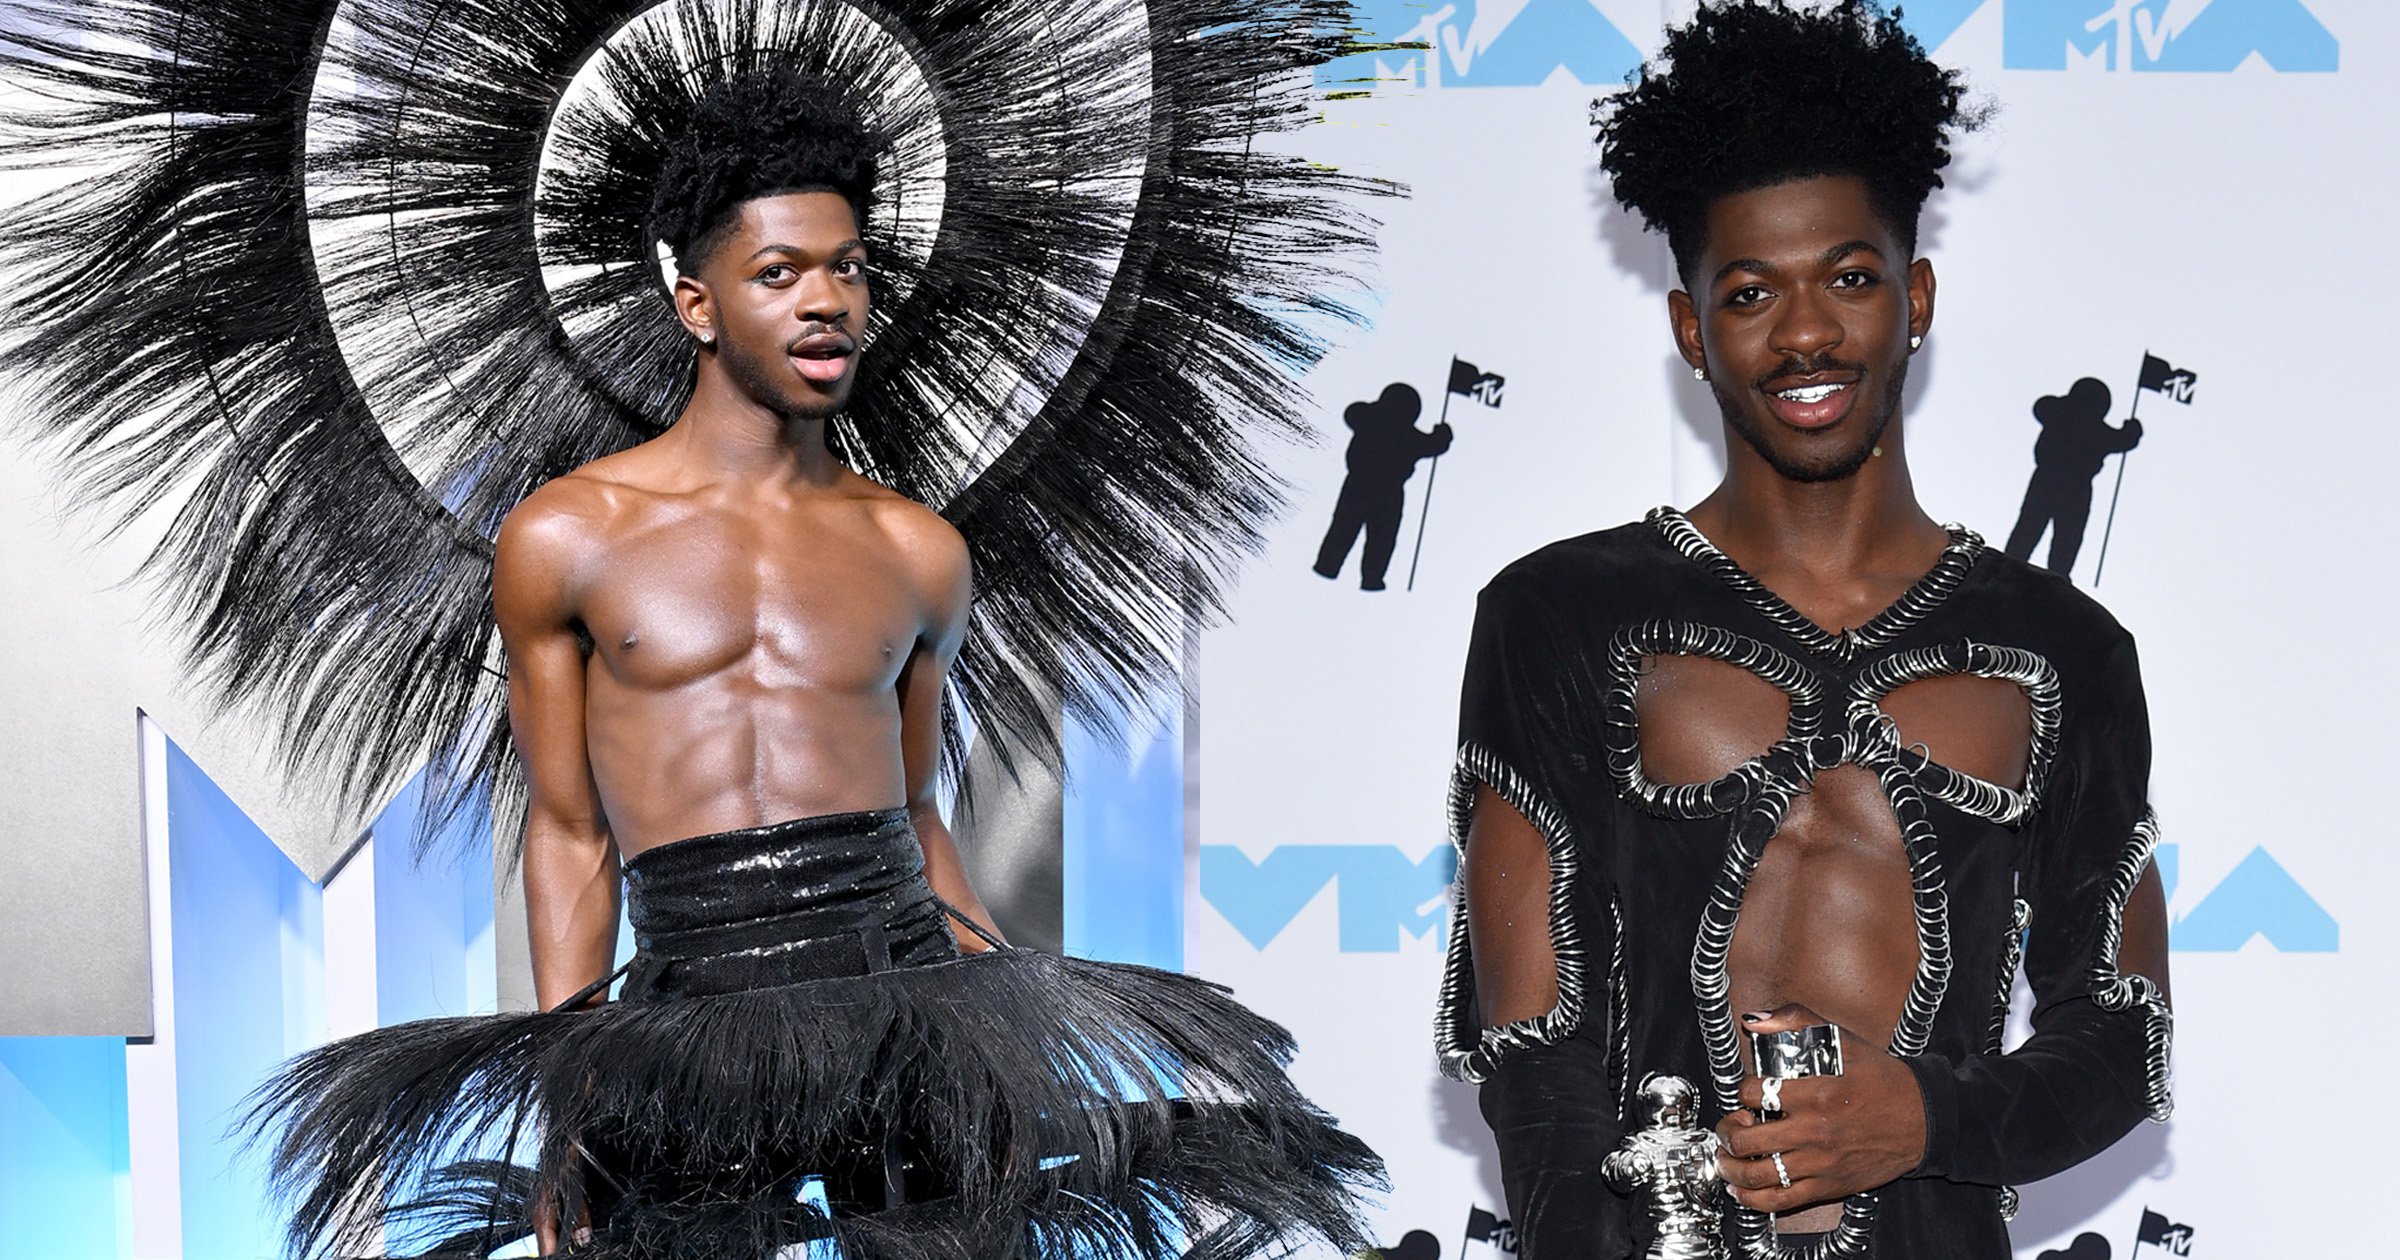 Lil Nas X steals the show in fabulous feathered headdress at VMAs